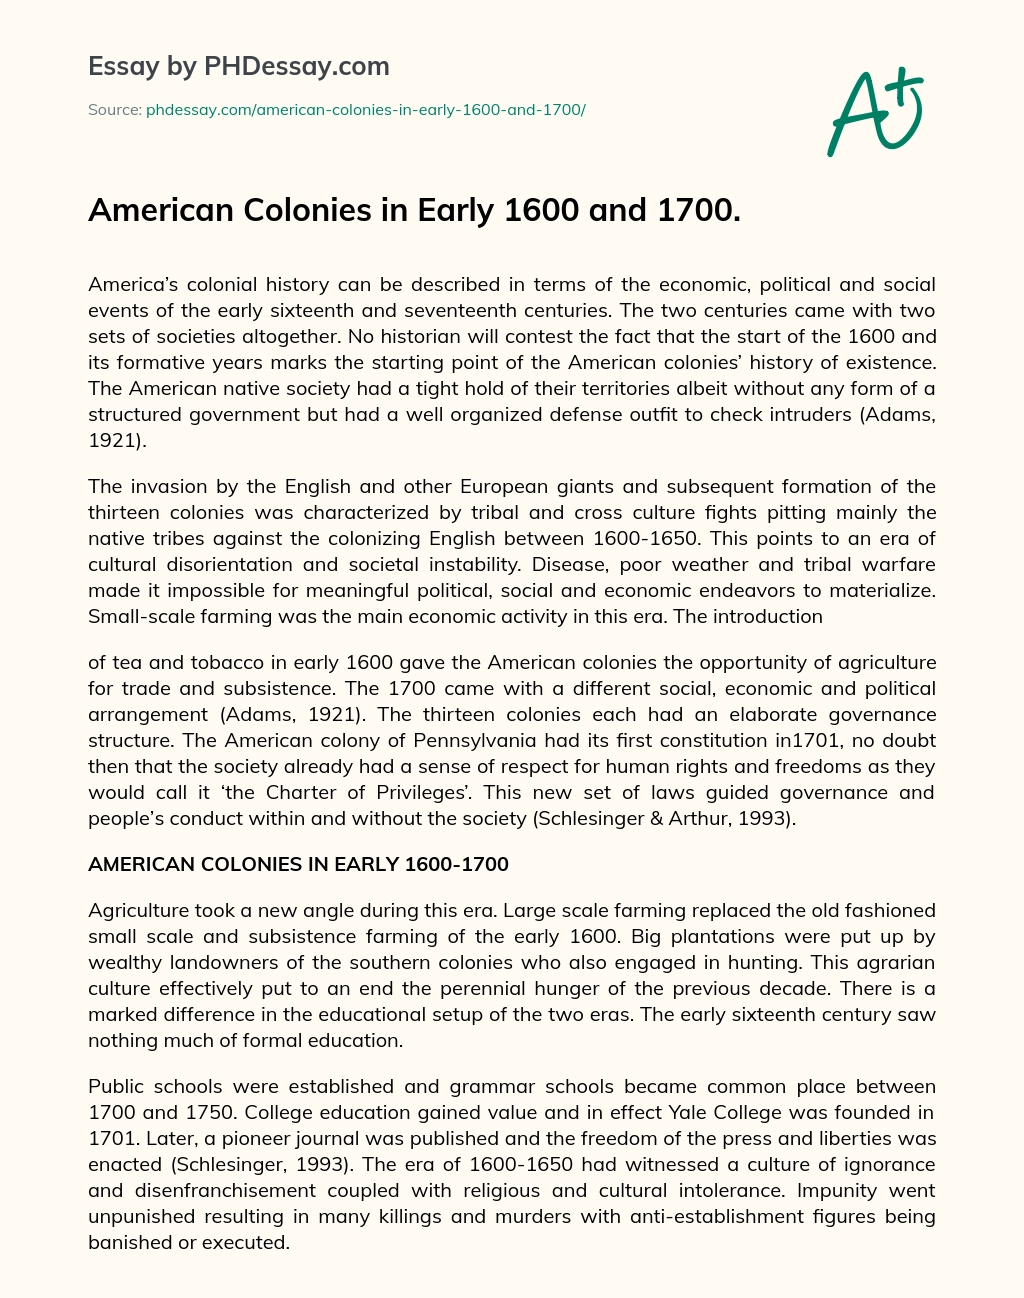 American Colonies in Early 1600 and 1700. essay